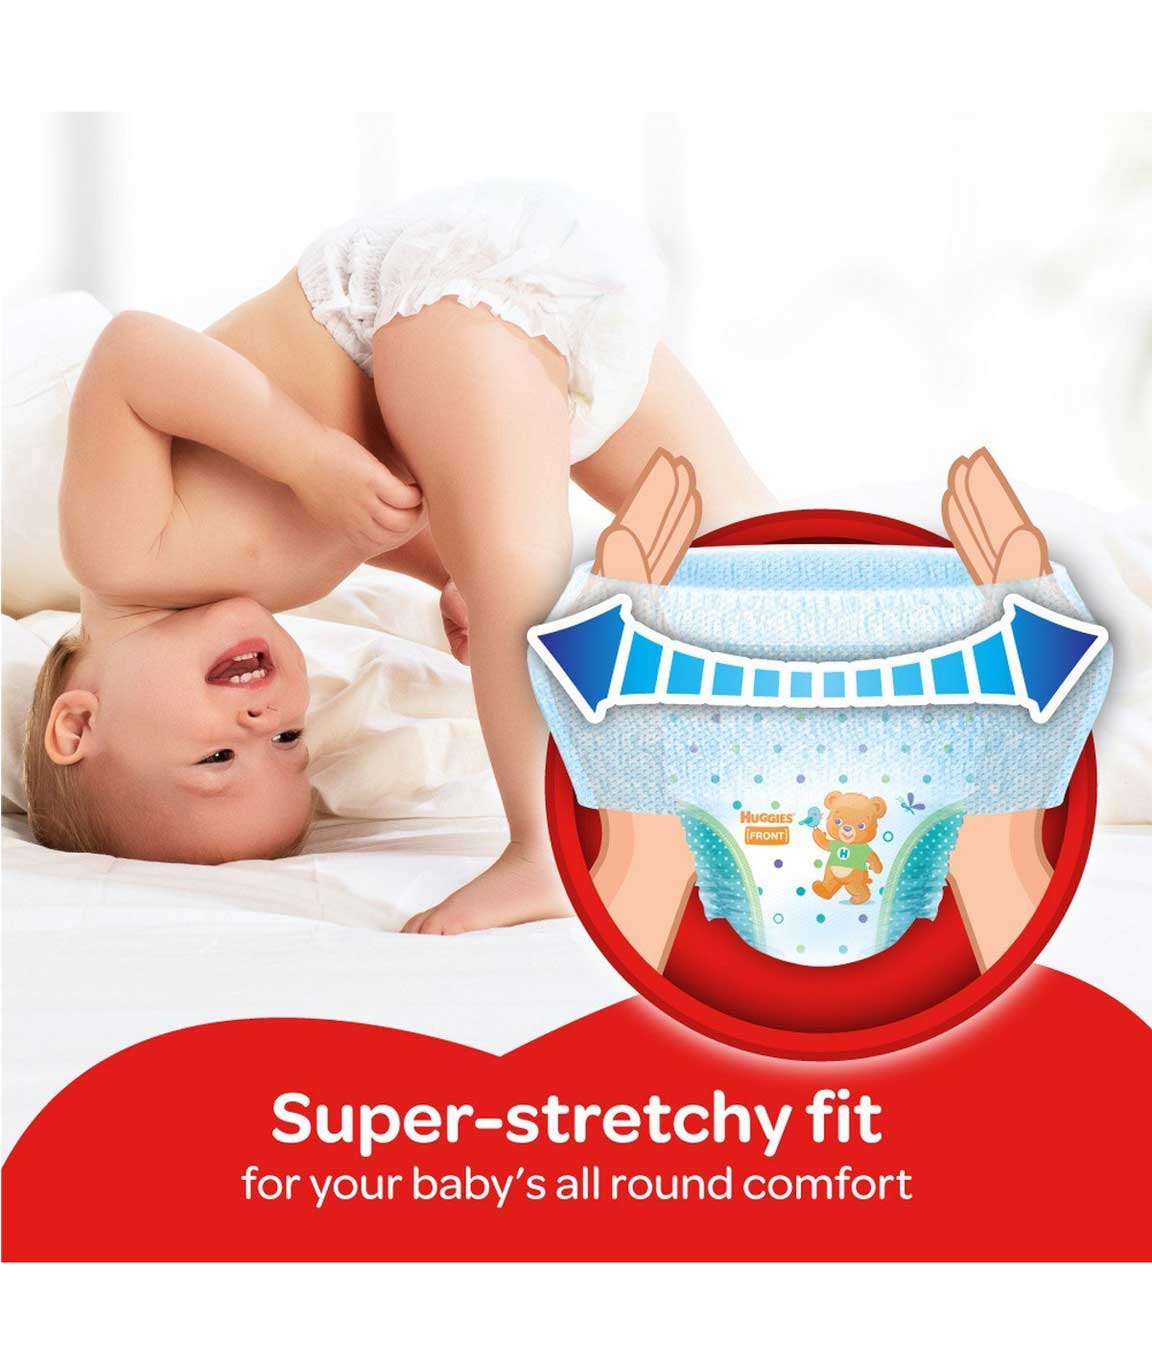 Buy Huggies Wonder Pants, Large Size Diapers, 64 Count & Huggies New Dry,  Taped Diapers, Large Size, 30 Count Online at Low Prices in India -  Amazon.in